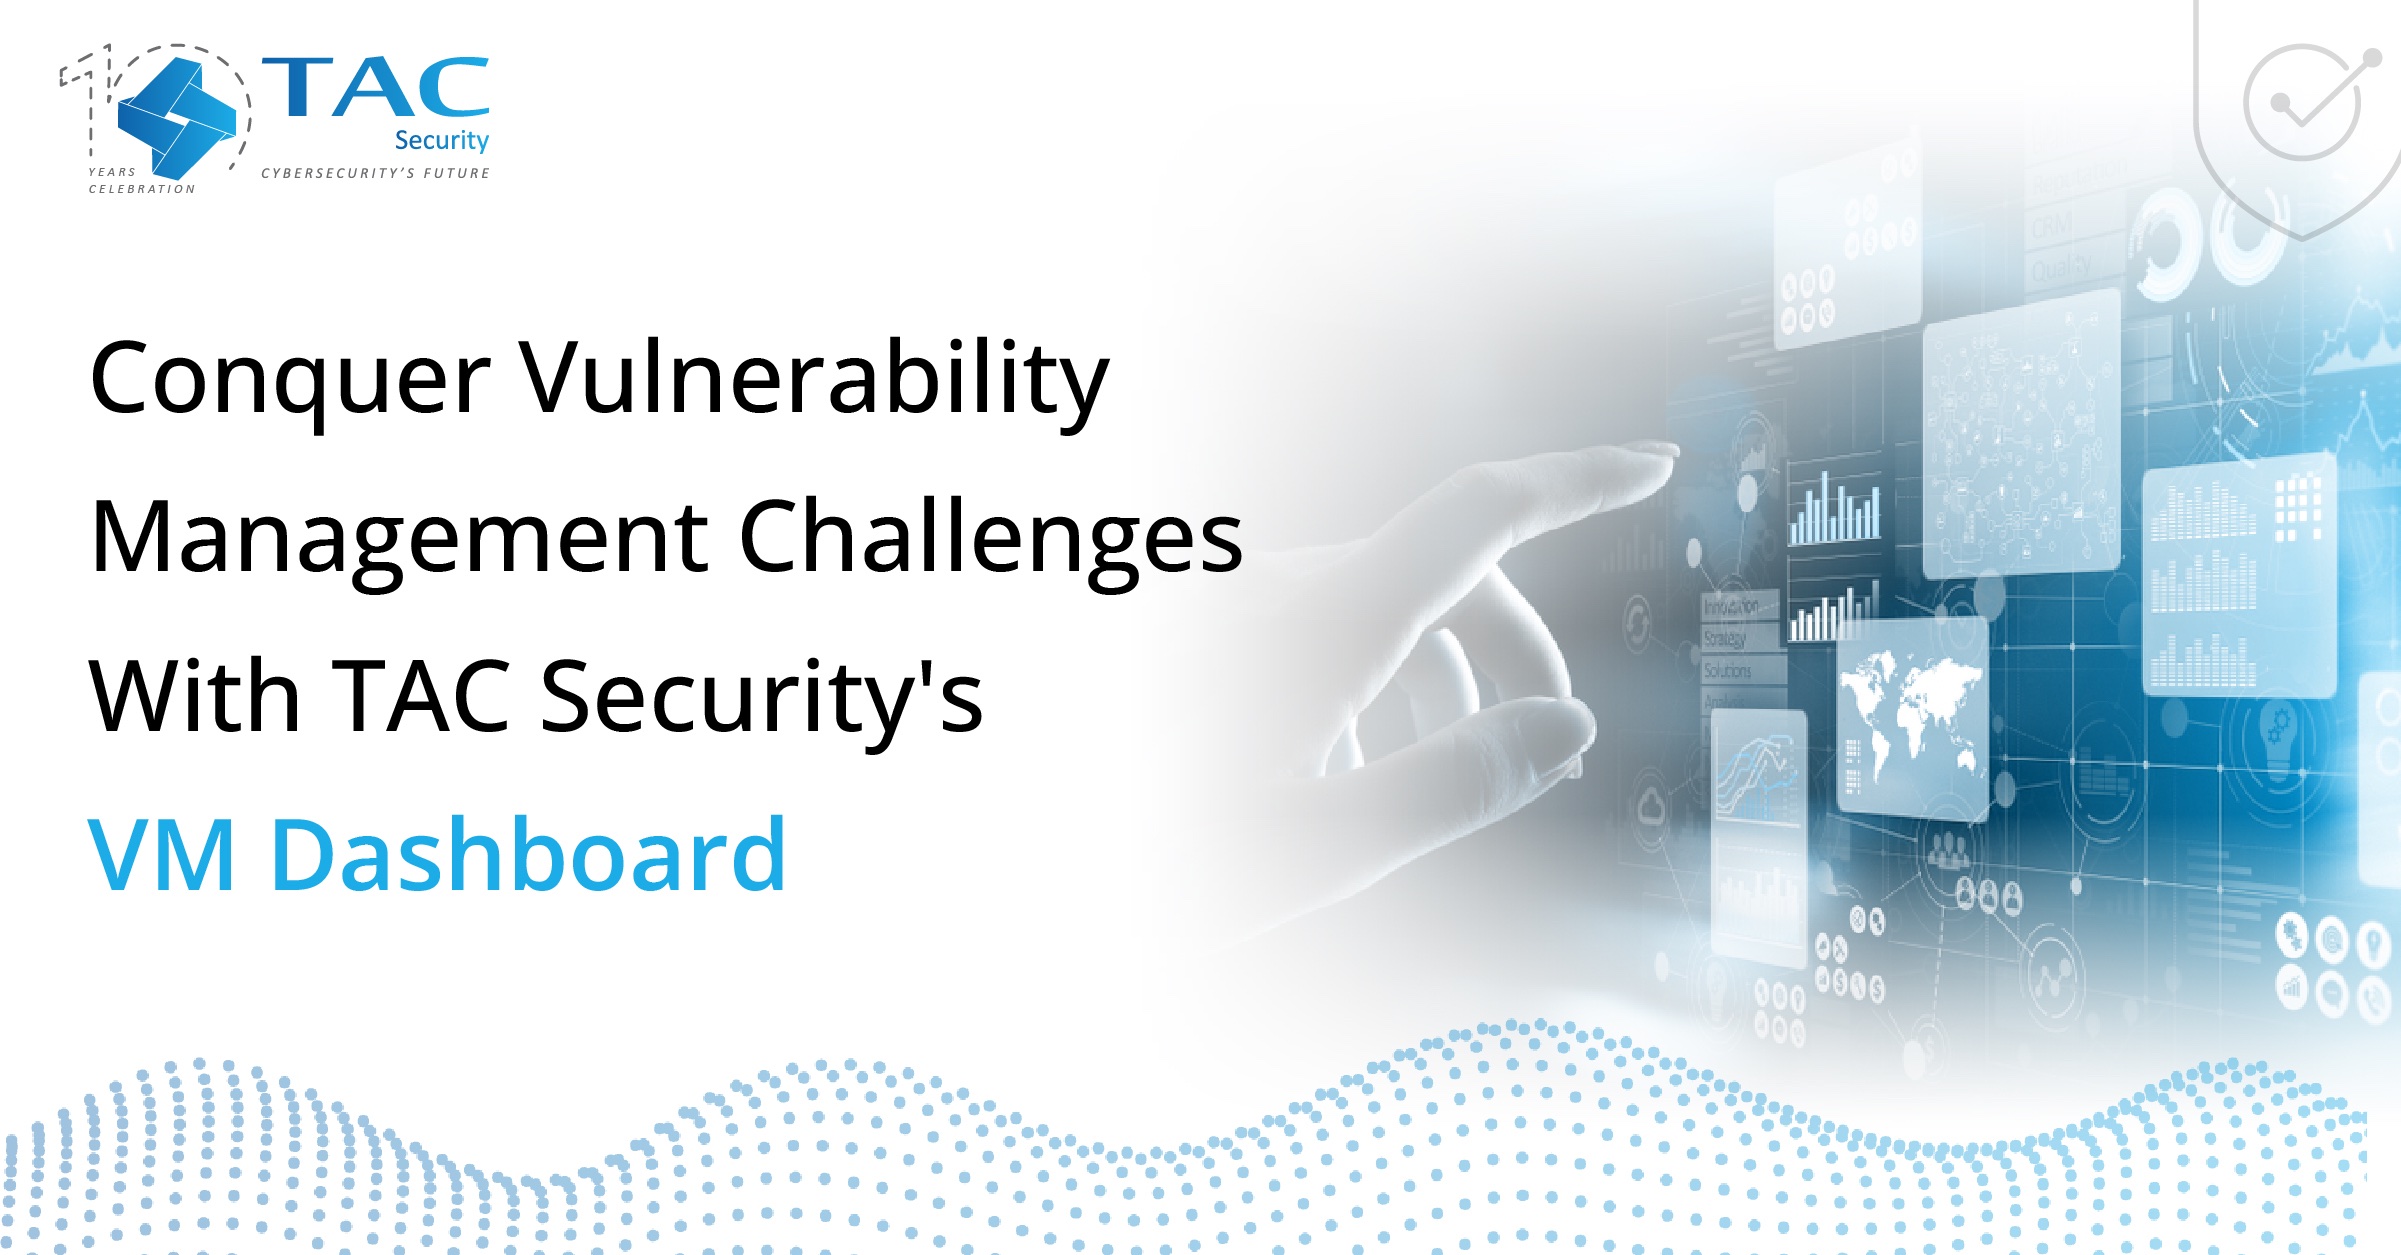 vulnerability challenges with tac security